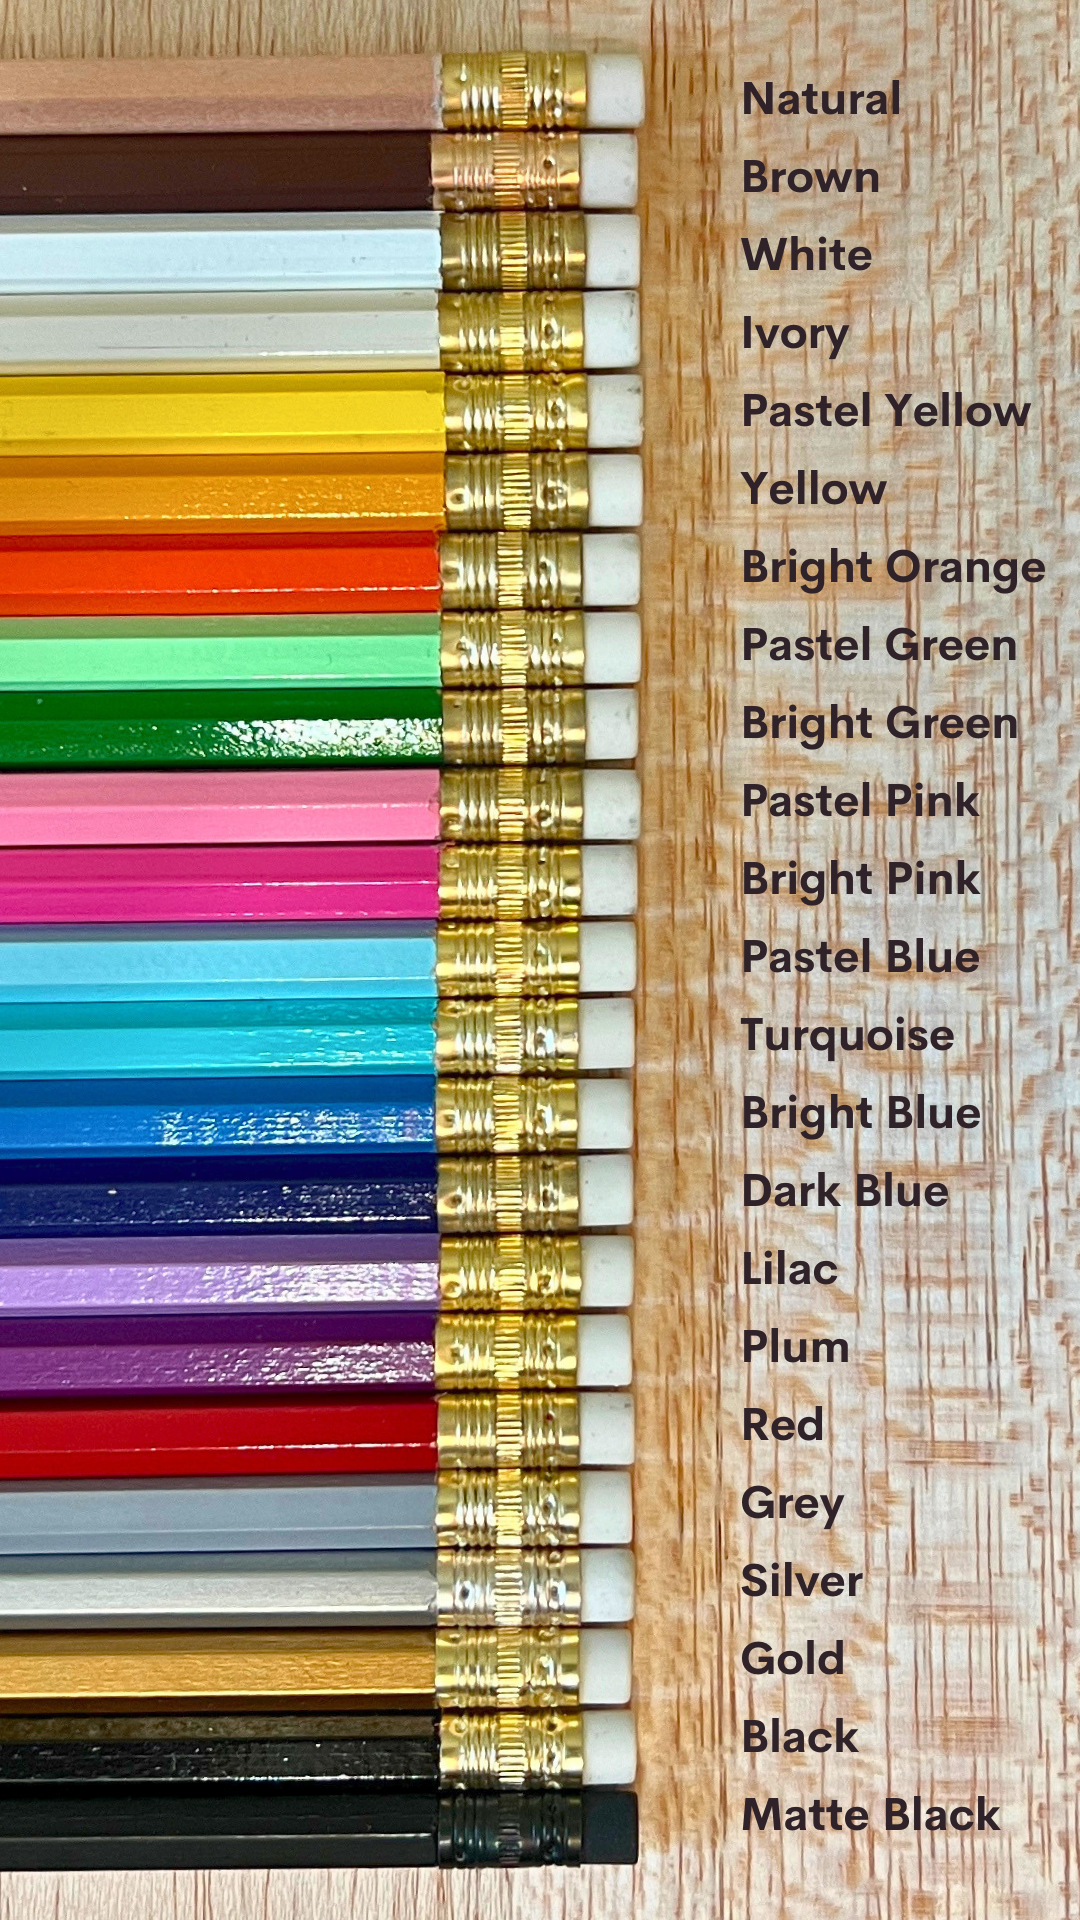 photo highlighting 23 assorted pencil colors and names for custom pencil orders